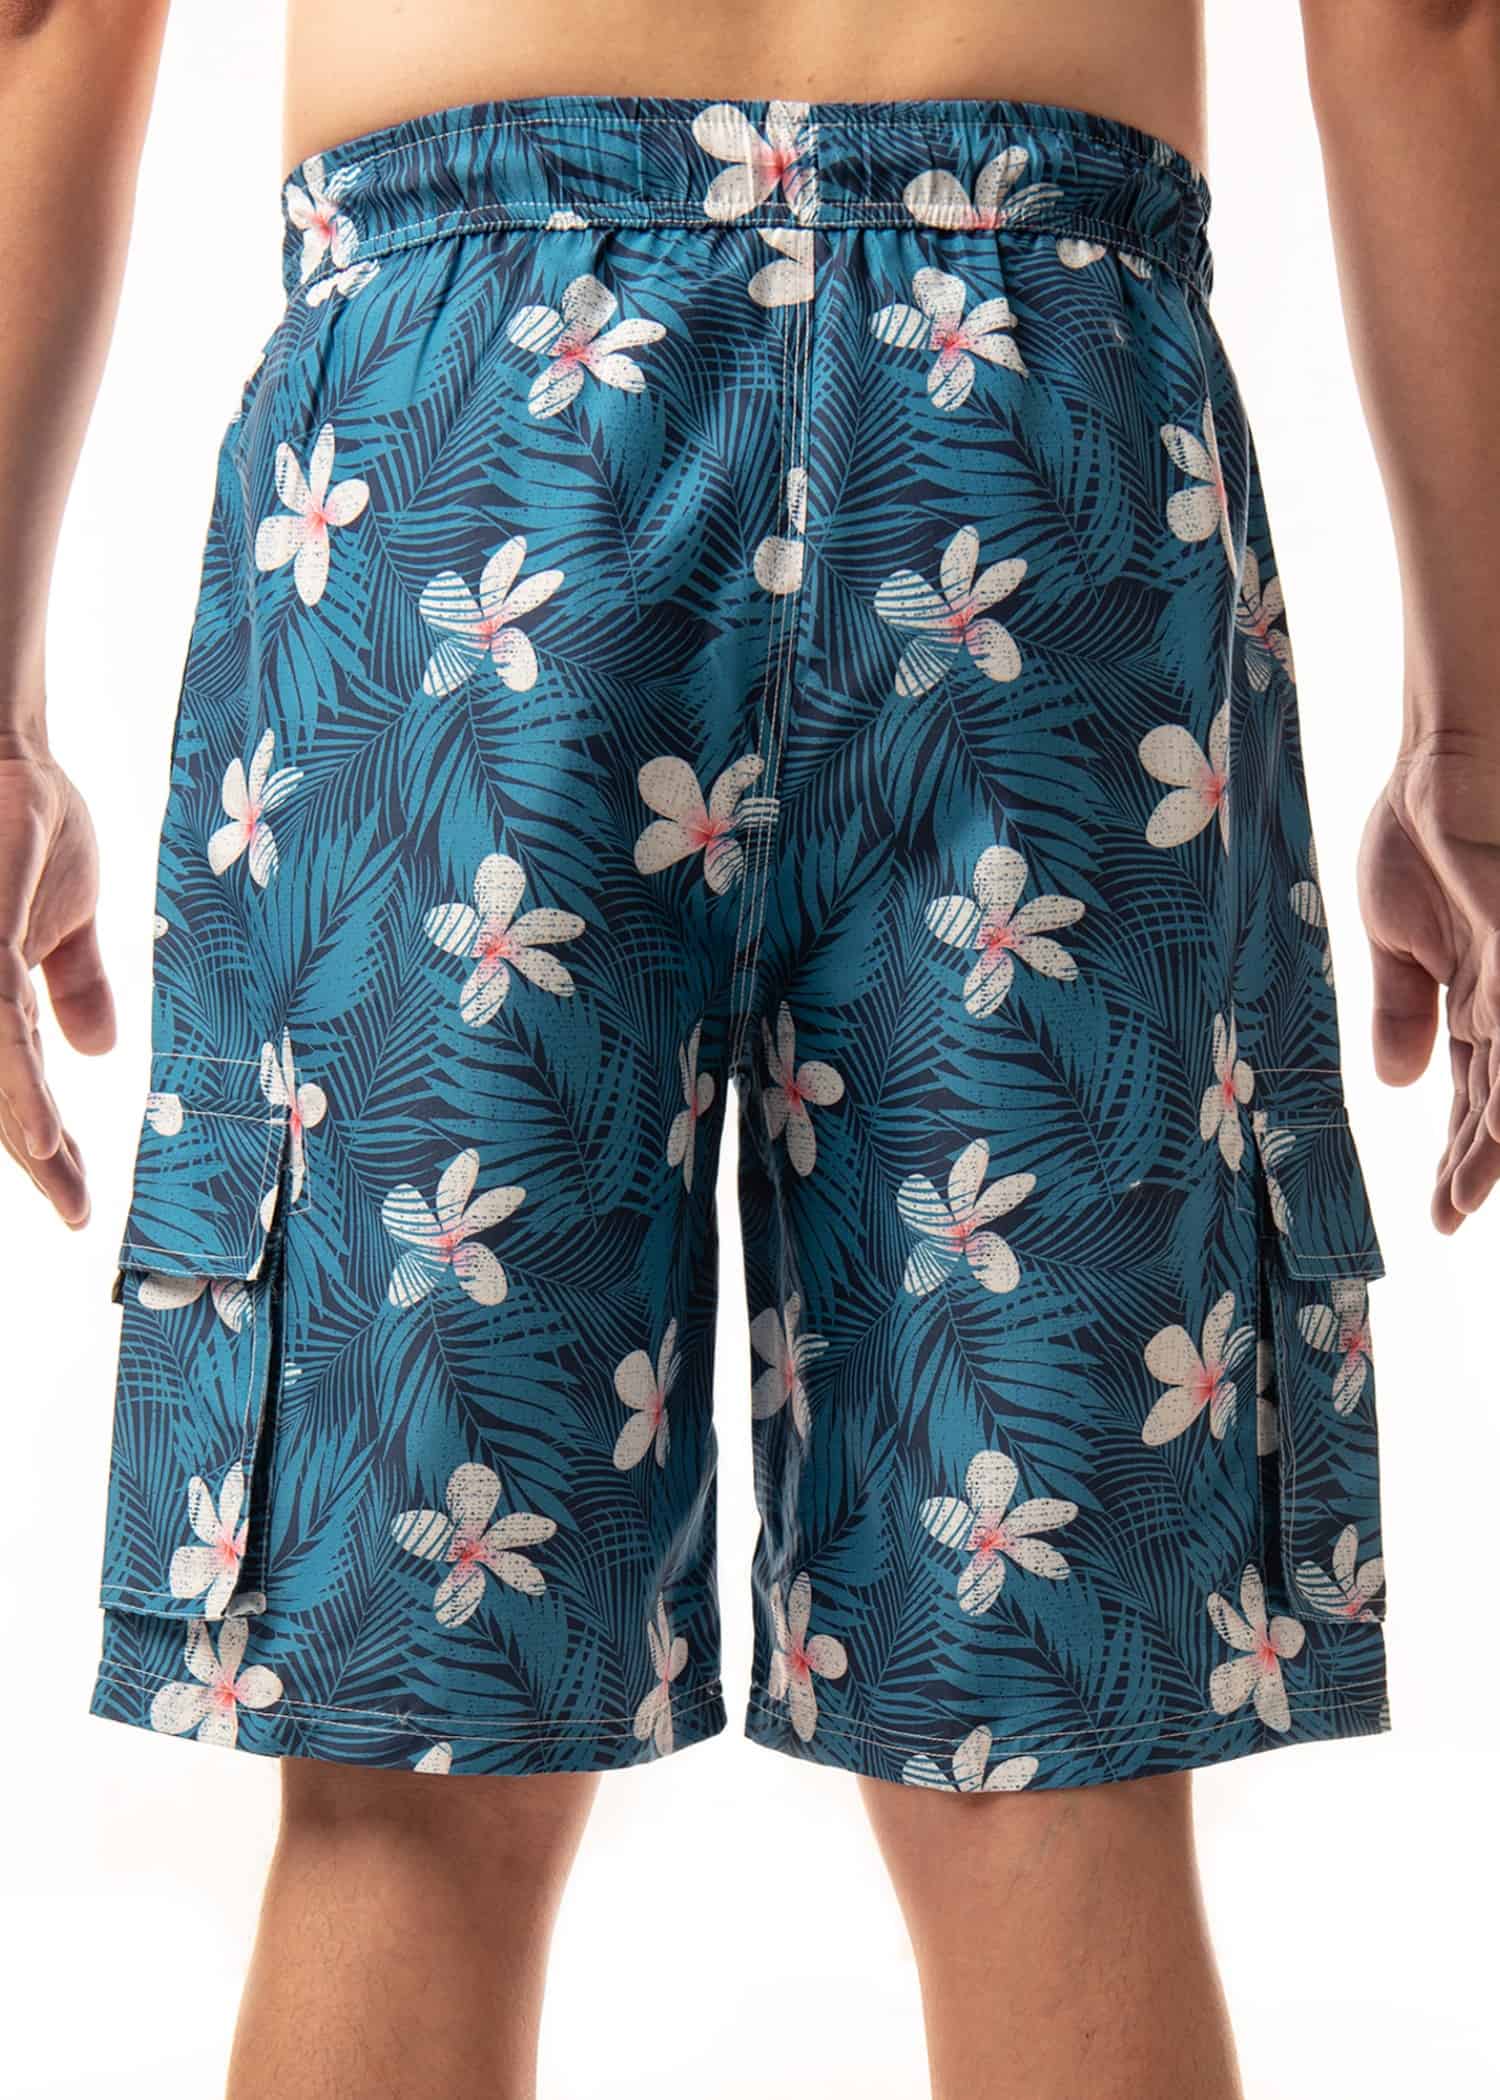 Back view of Men’s Midnight Bloom Board Shorts, highlighting the elastic waistband and unique floral design